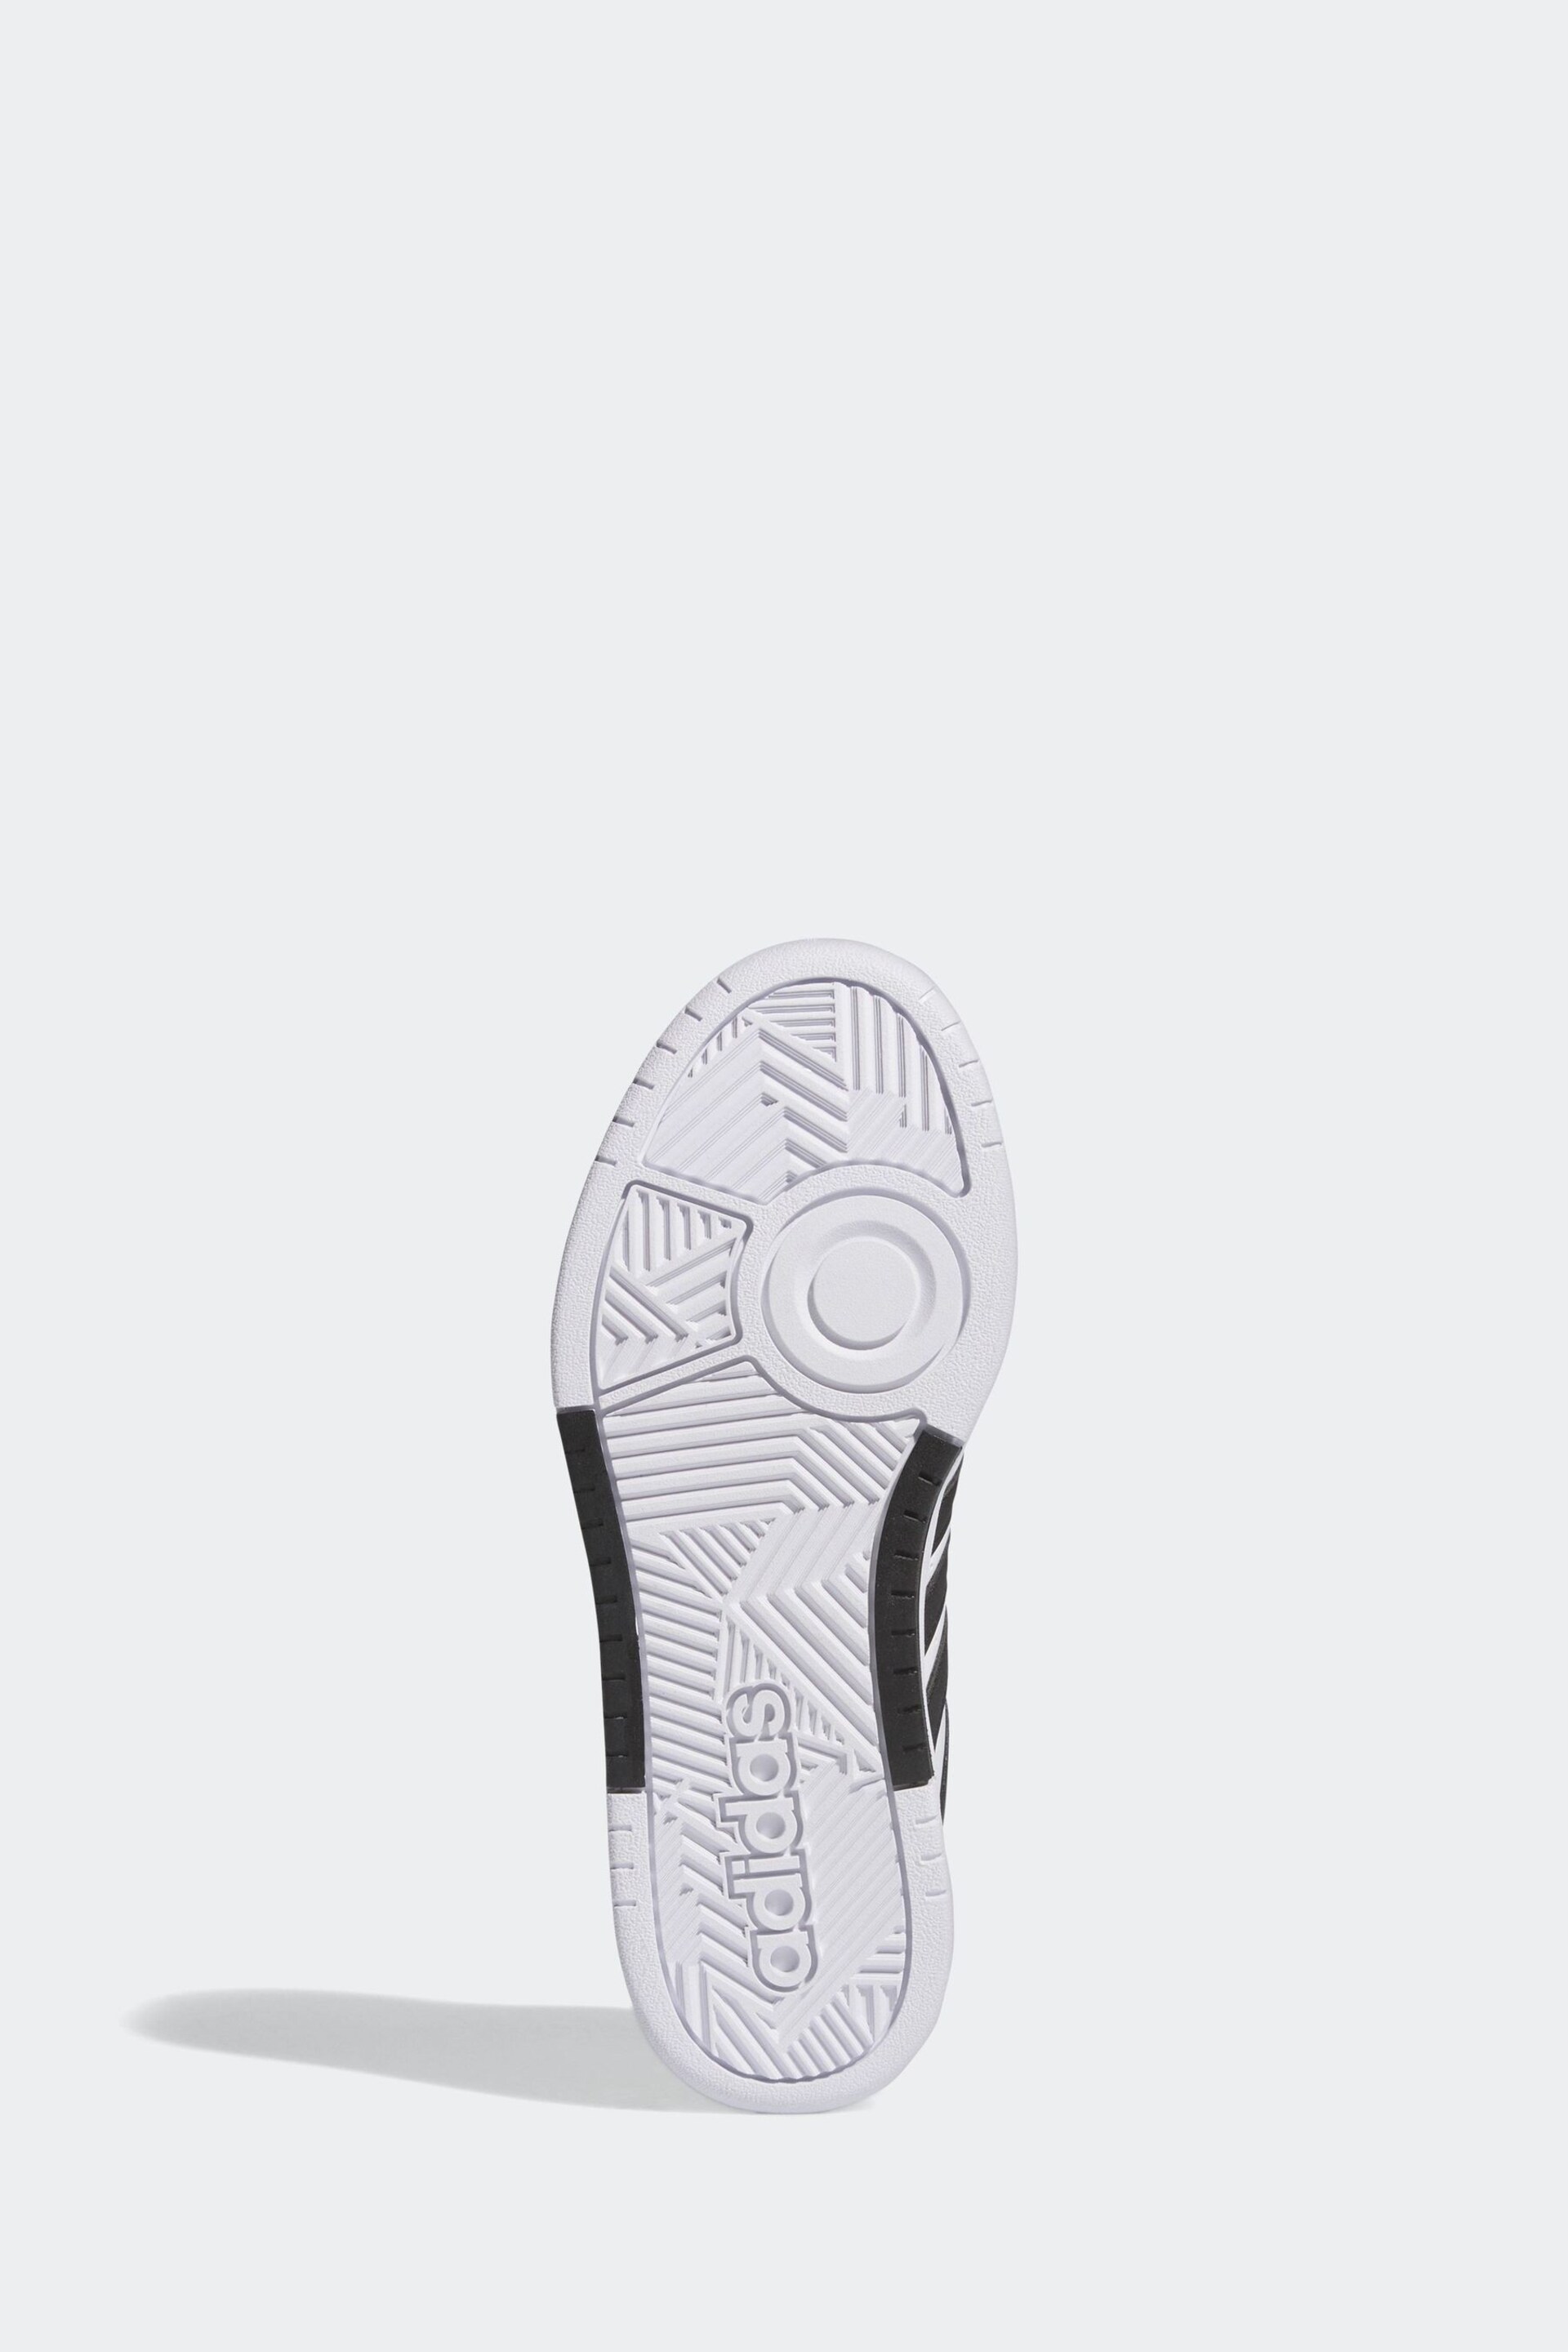 adidas Originals White/Black Hoops 3.0 Bold Trainers - Image 6 of 10